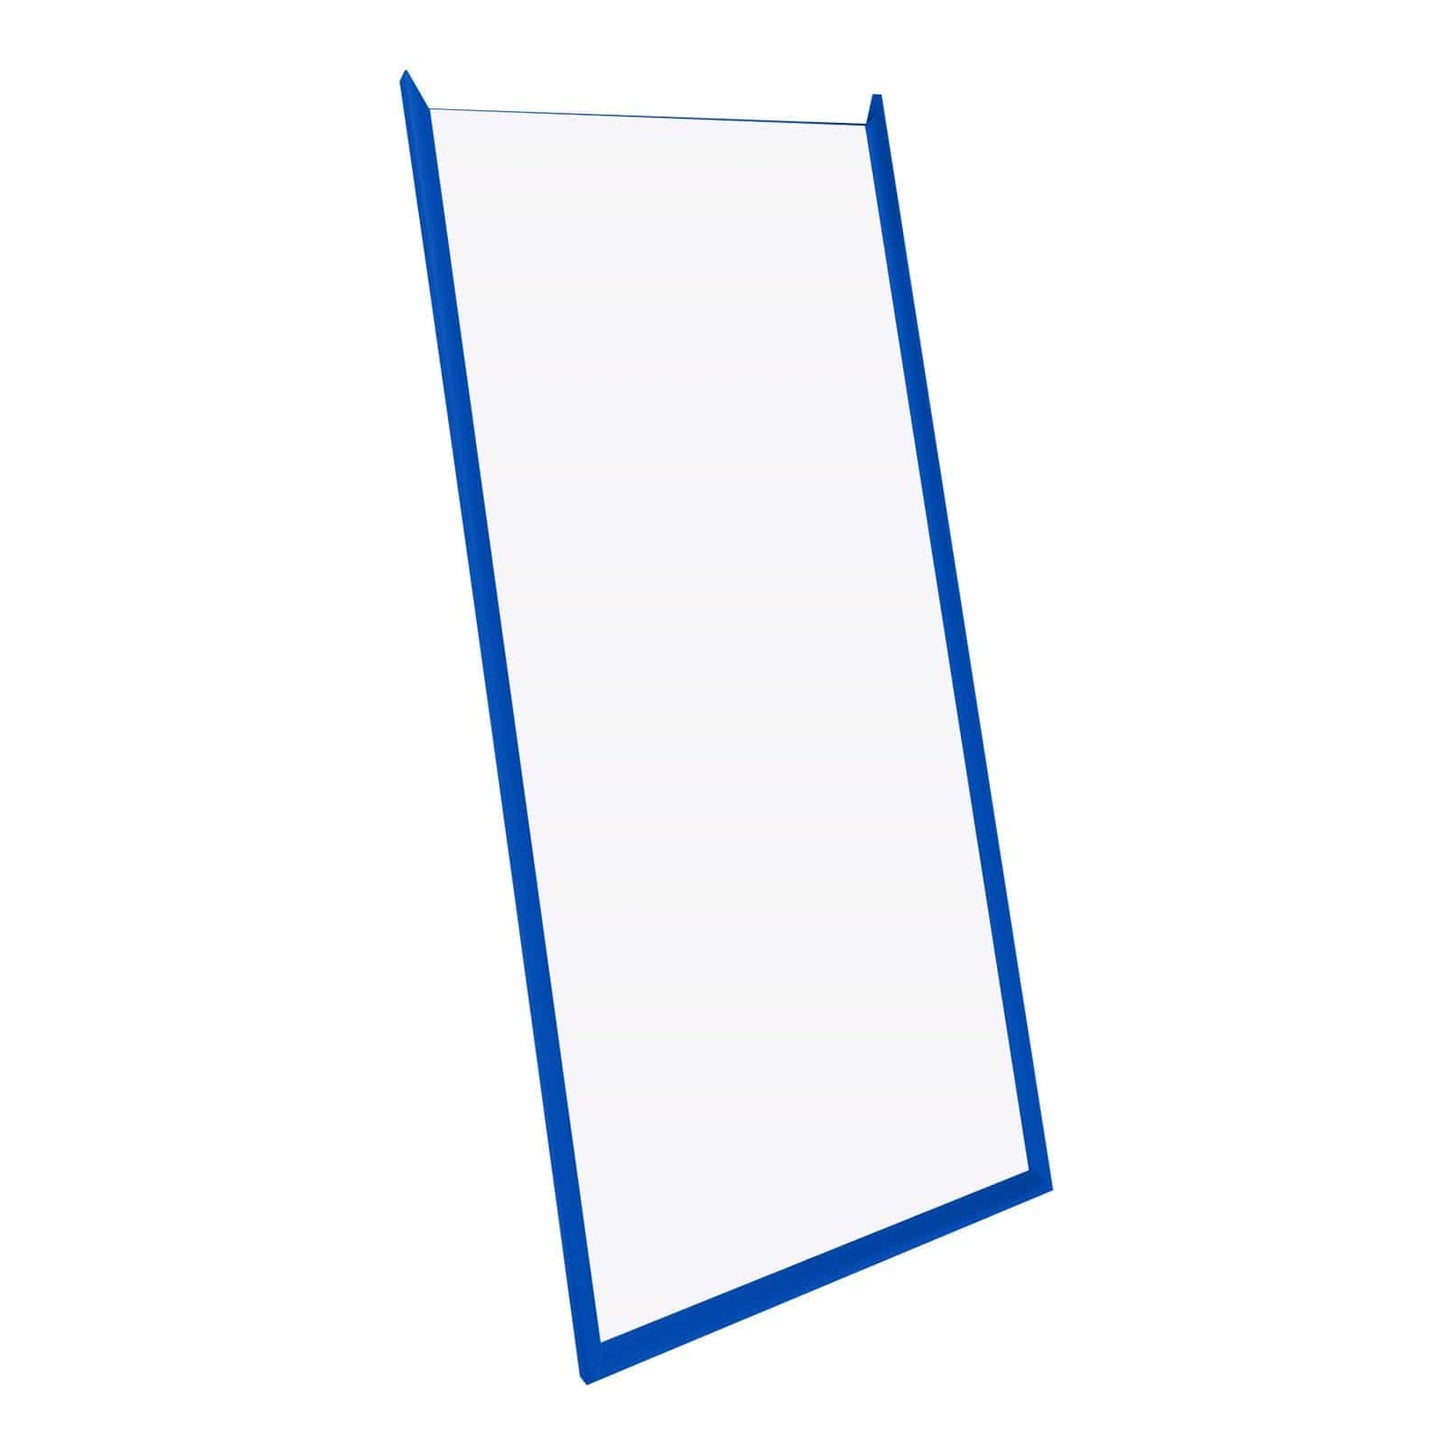 10x24 Blue SnapeZo® Snap Frame - 1.2" Profile - Snap Frames Direct